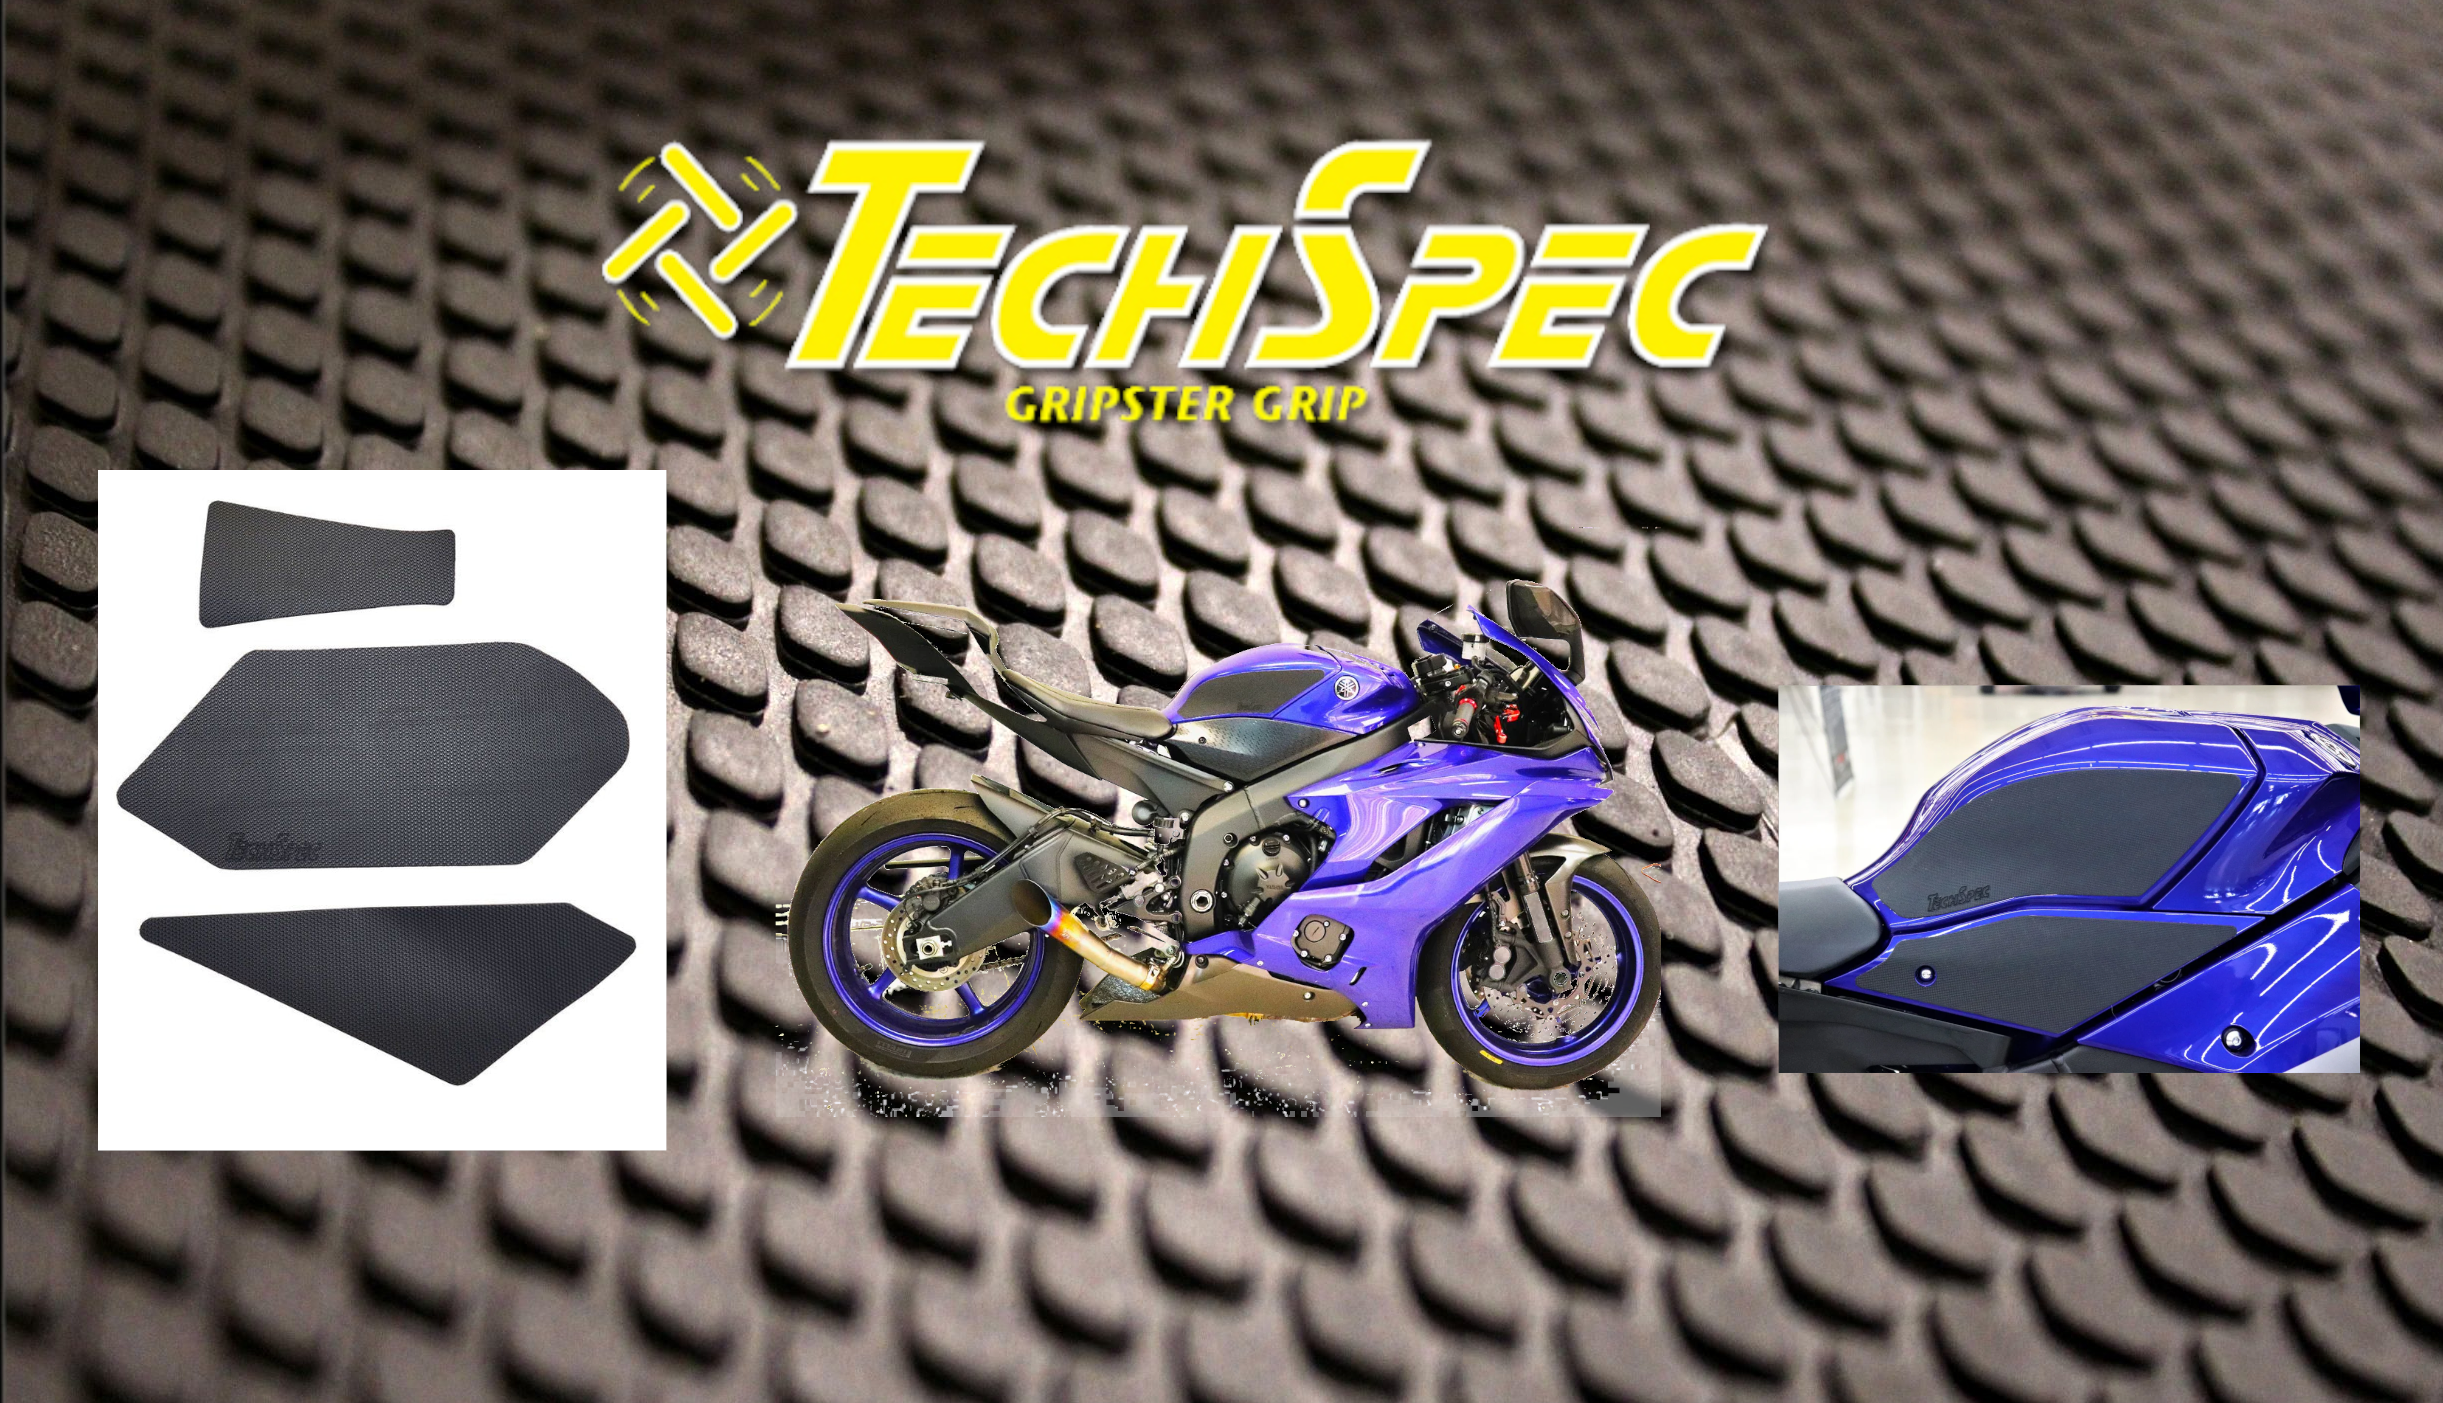 Now available – TechSpec Motorcycle Tank Grips!